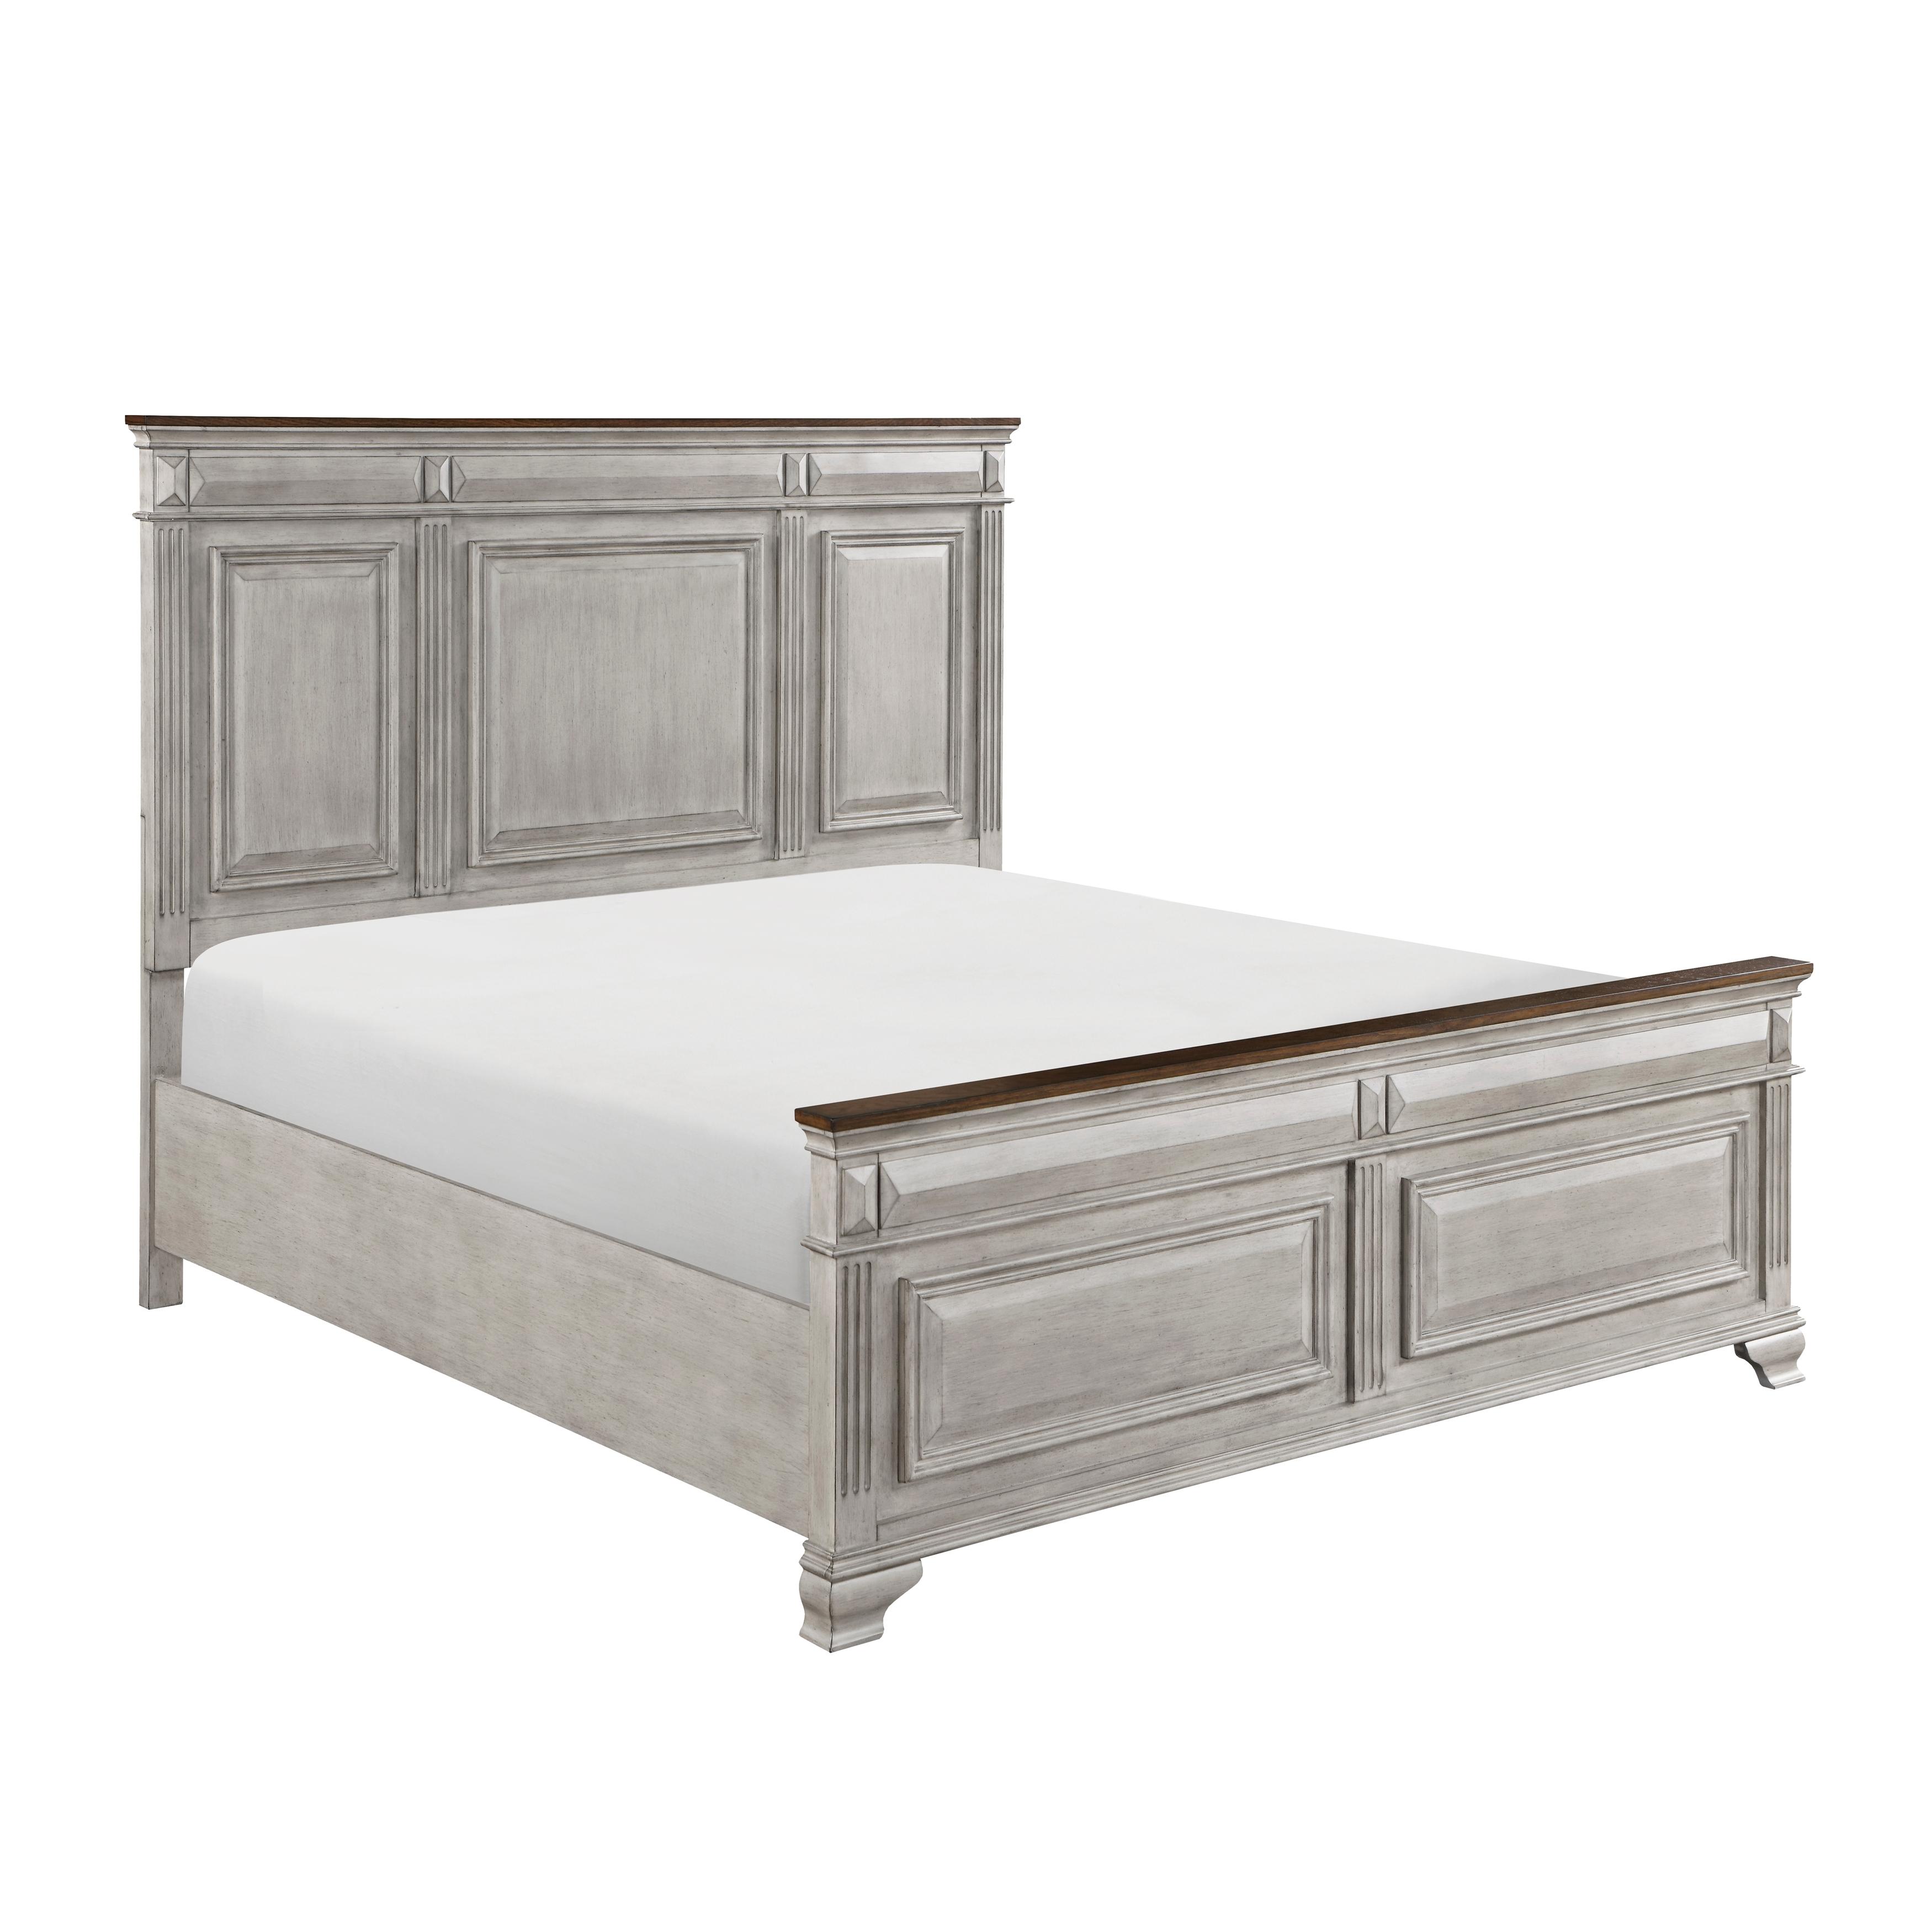 Homelegance Marquette Queen Bed 1449-1-Q Panel Bed